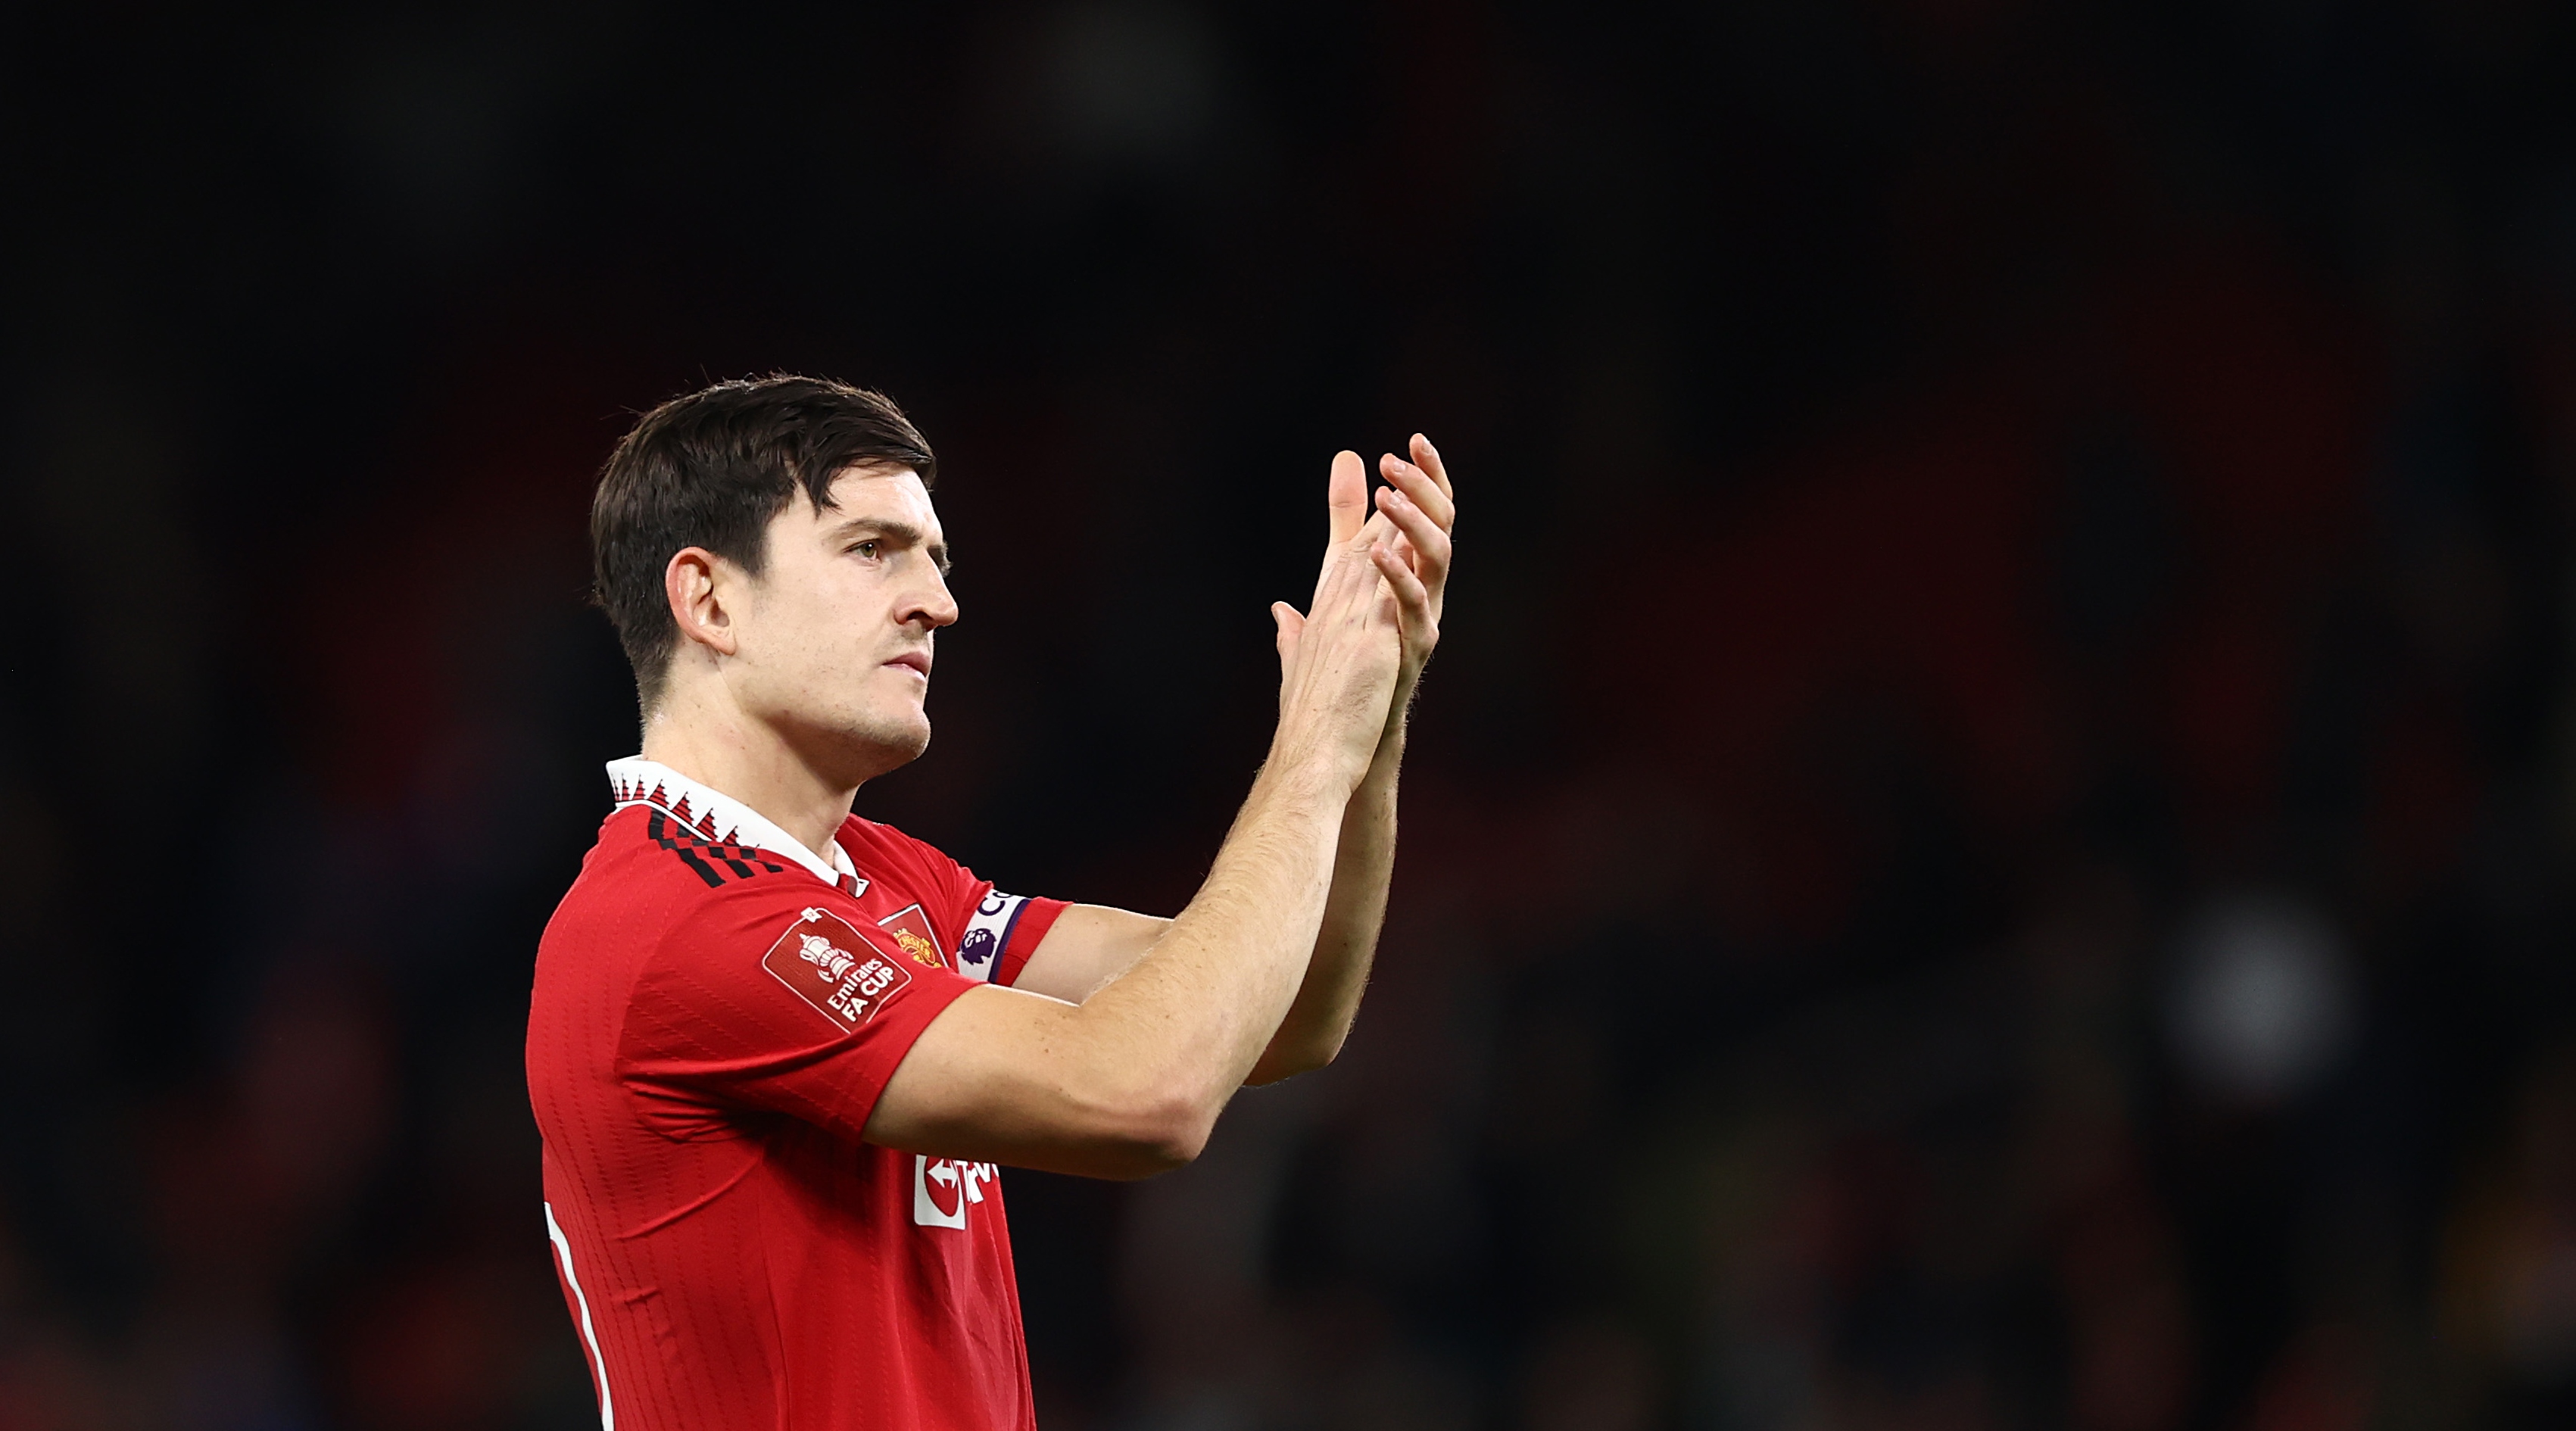 Harry Maguire of Manchester United applauds the supporters after the Emirates FA Cup third round match between Manchester United and Everton on 6 January, 2023 at Old Trafford in Manchester, United Kingdom.